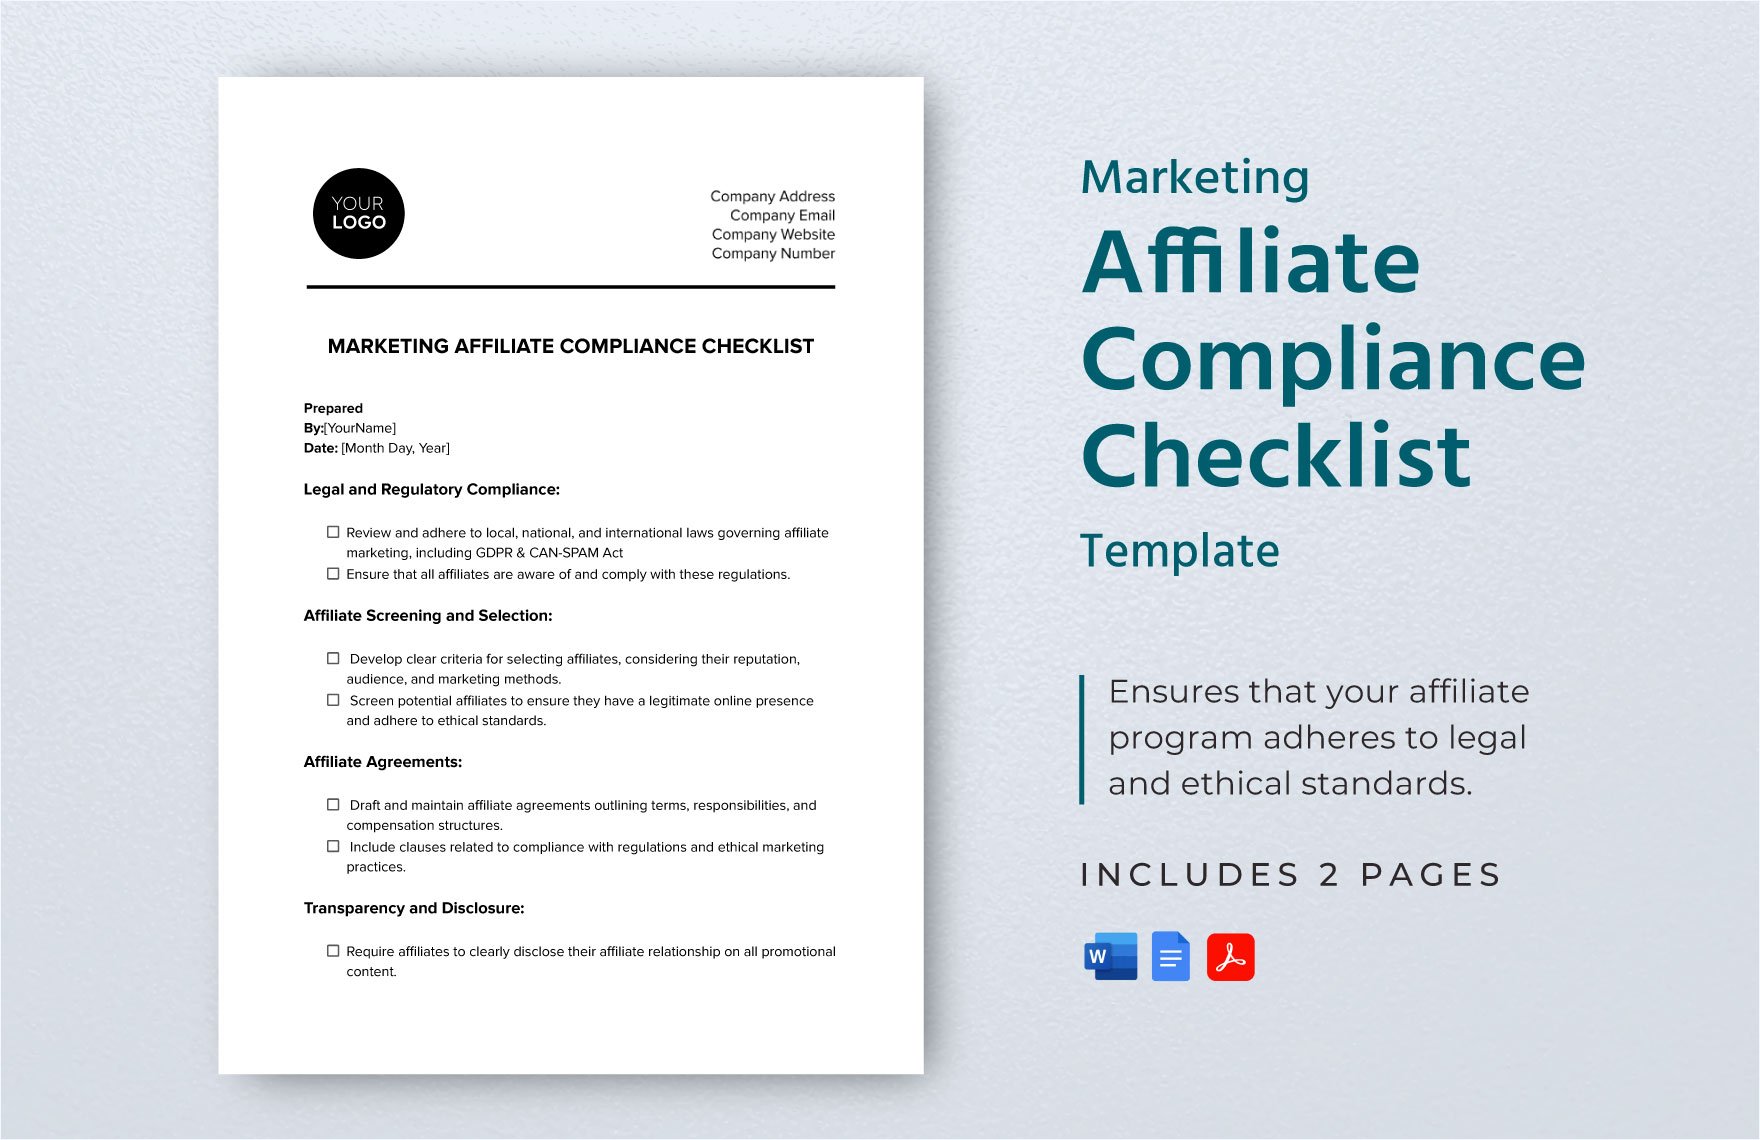 Marketing Affiliate Compliance Checklist Template in Word, Google Docs, PDF